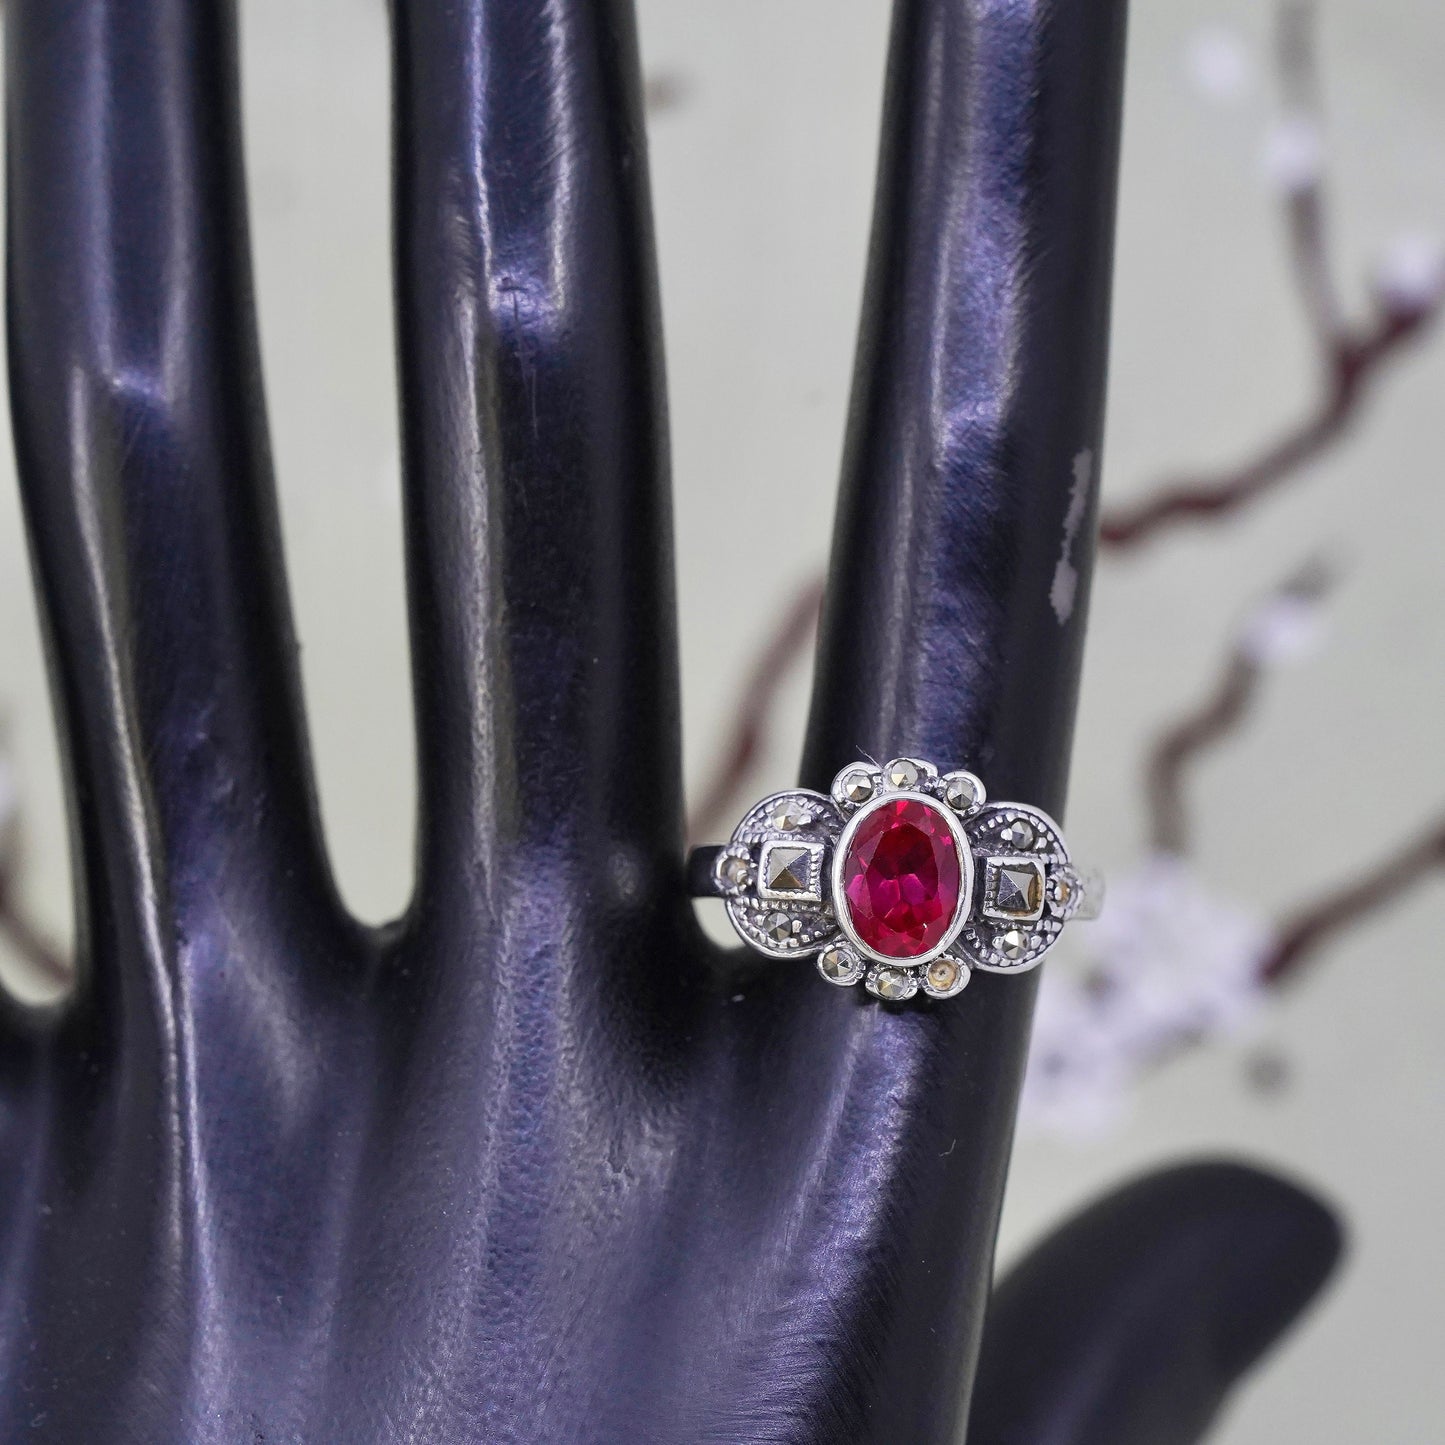 Size 7.5, Vintage Sterling 925 silver handmade ruby ring with marcasite